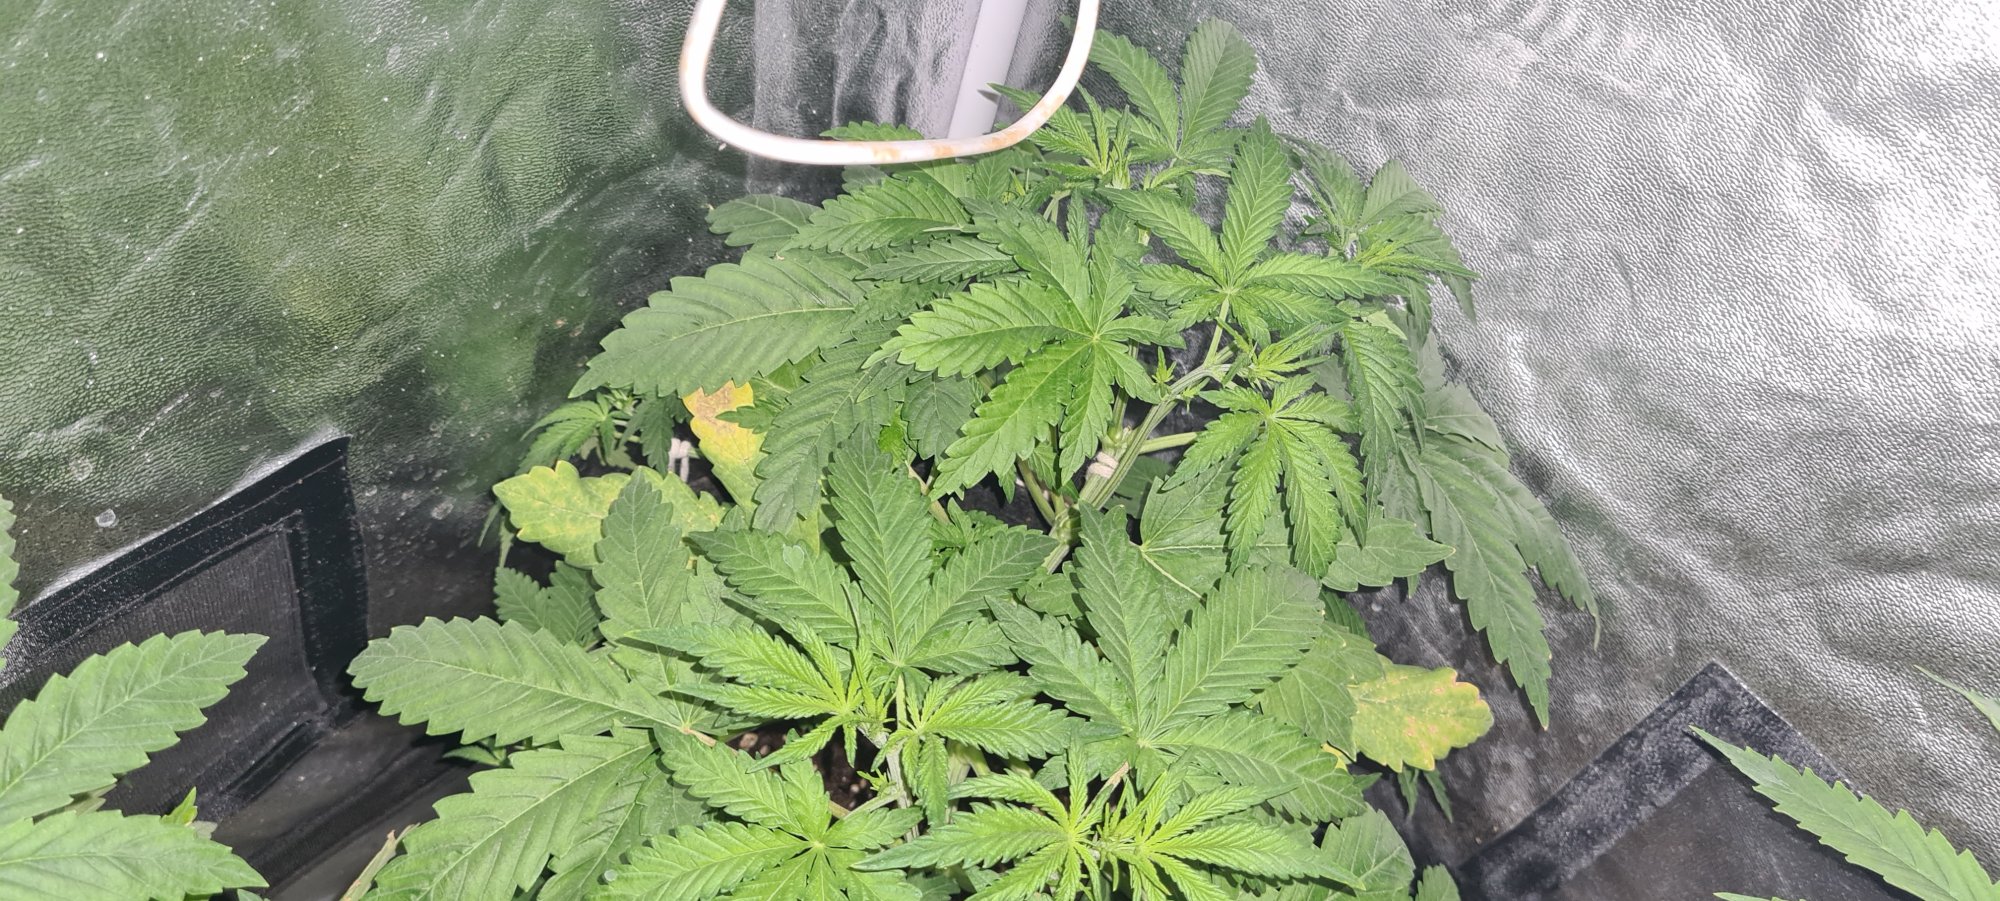 Is this nitrogen deficiency or other deficiency 6